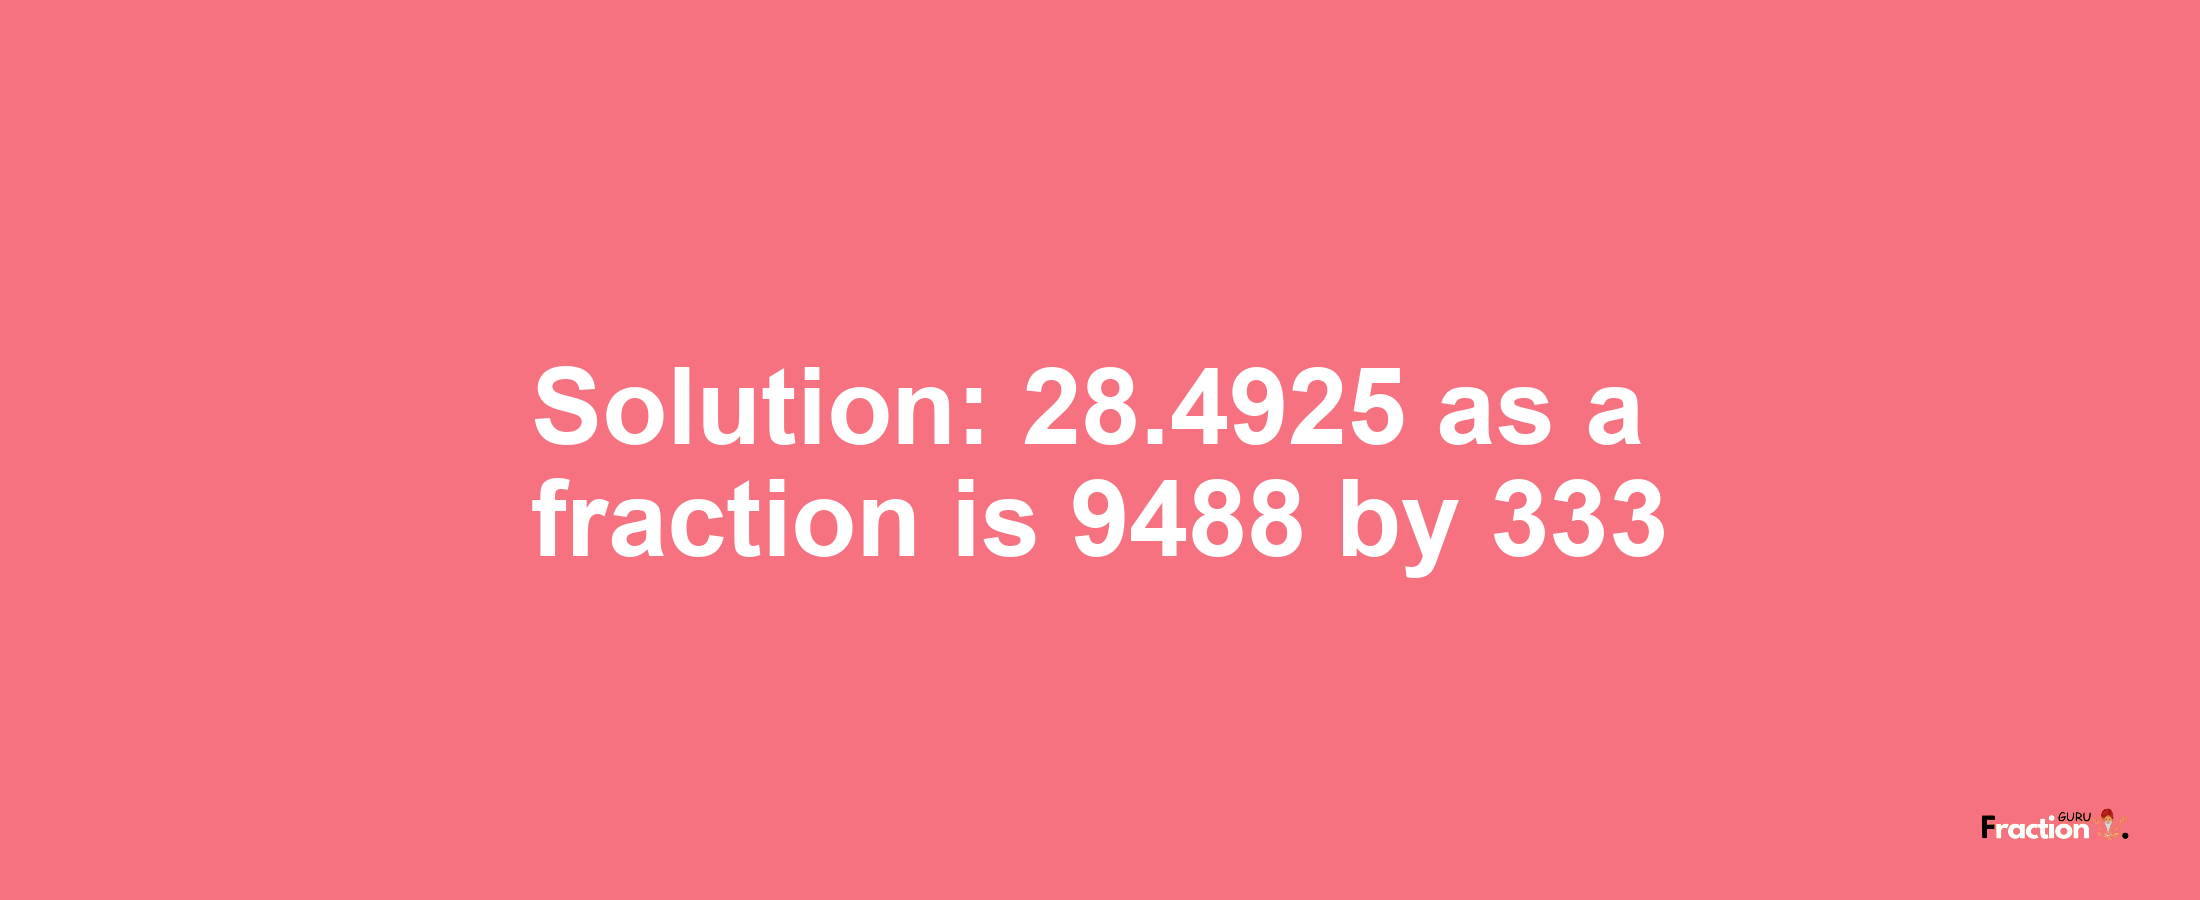 Solution:28.4925 as a fraction is 9488/333